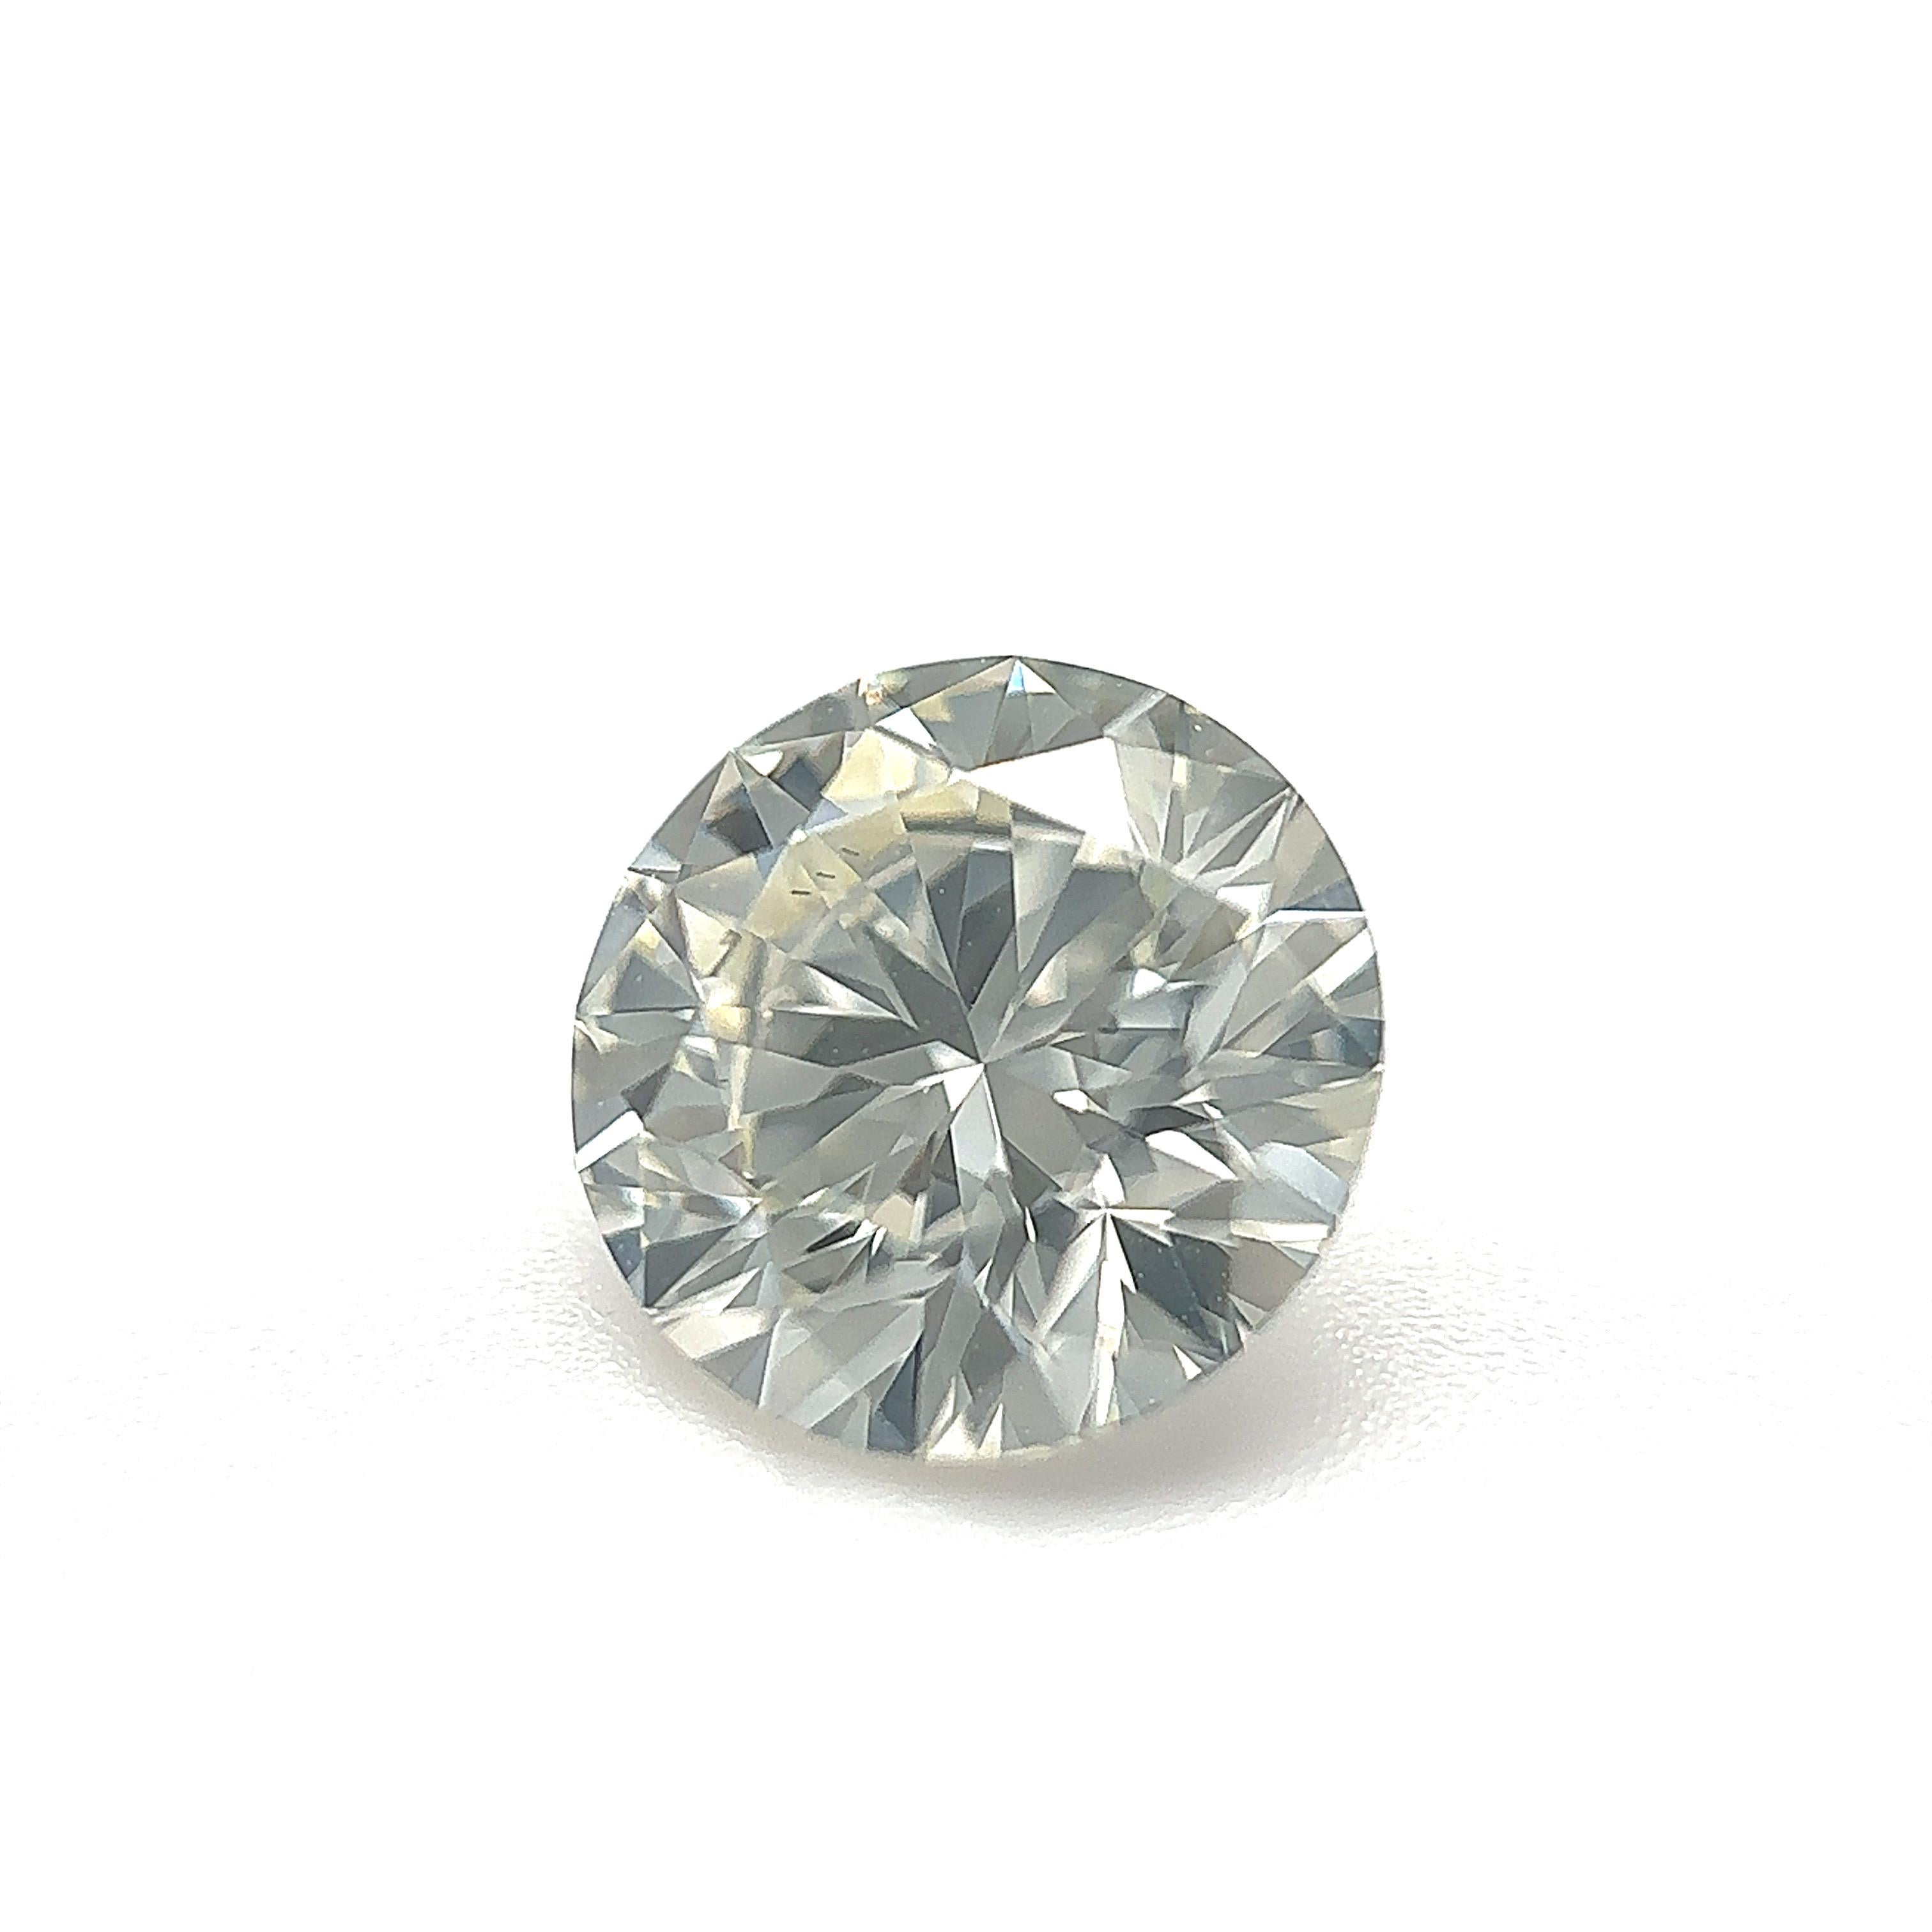 GIA Certified 1.51 Carat Round Brilliant Natural Diamond Loose Stone (Customization Option)

Color: K
Clarity: VS1 

Ideal for engagement rings, wedding bands, diamond necklaces and diamond earrings. Get in touch with us to customise your jewellery!